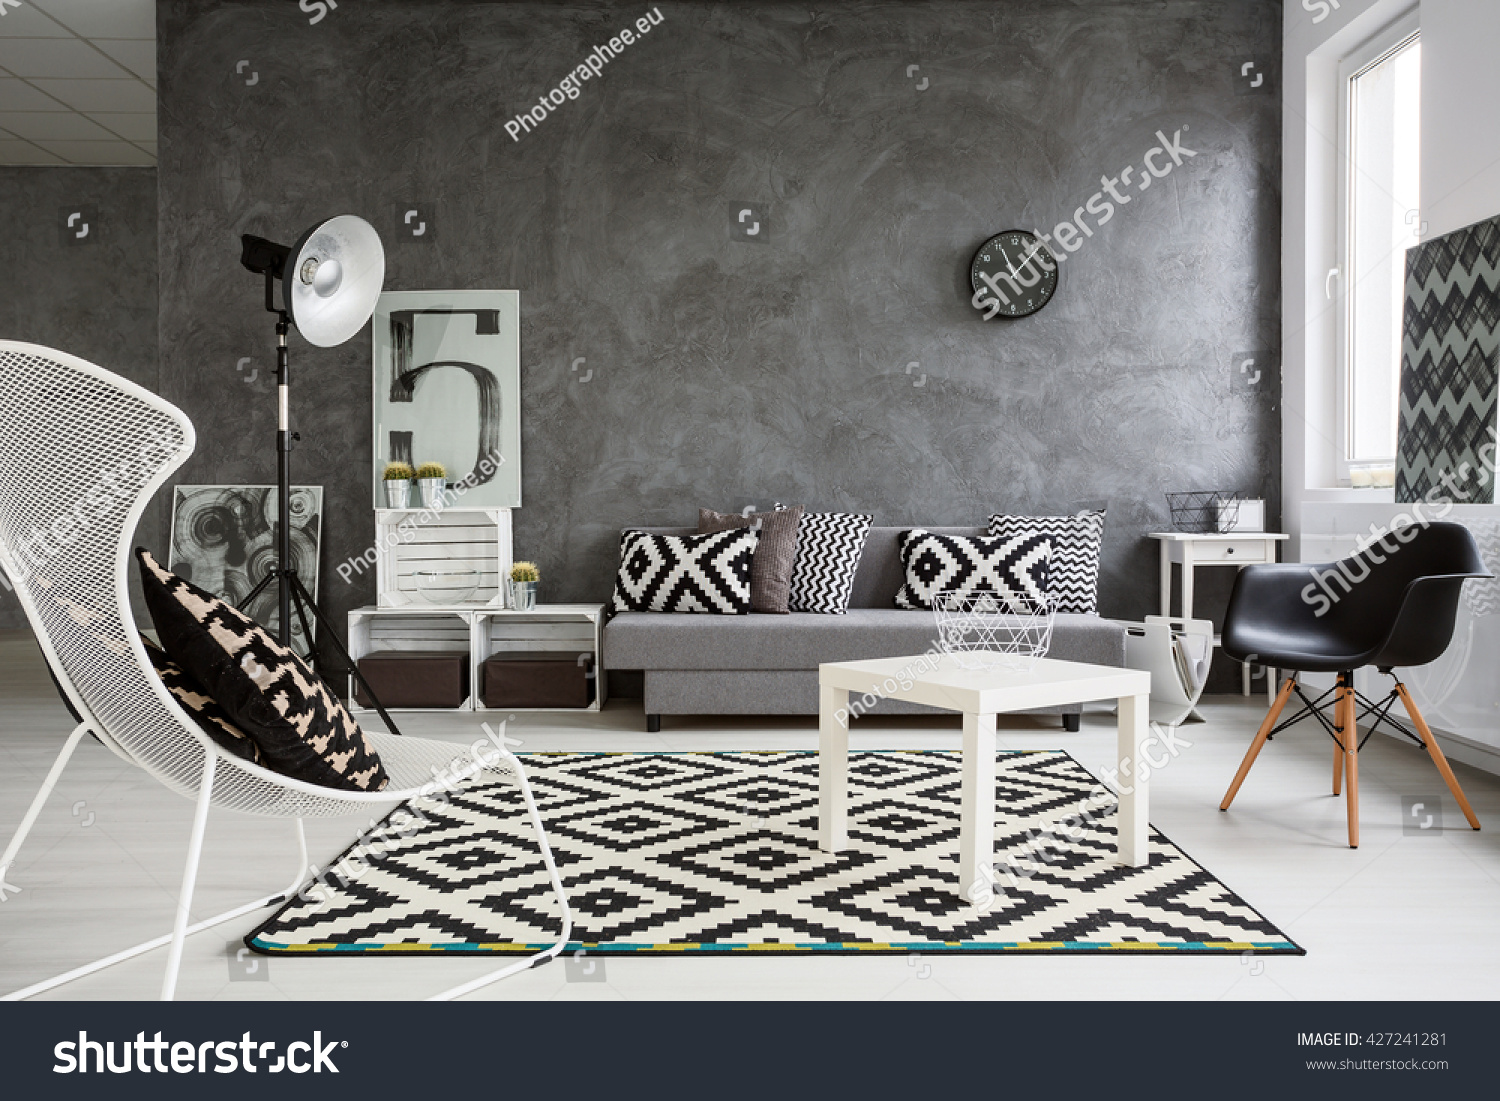 Spacious classic living room in black and white. Interior designed with style #427241281